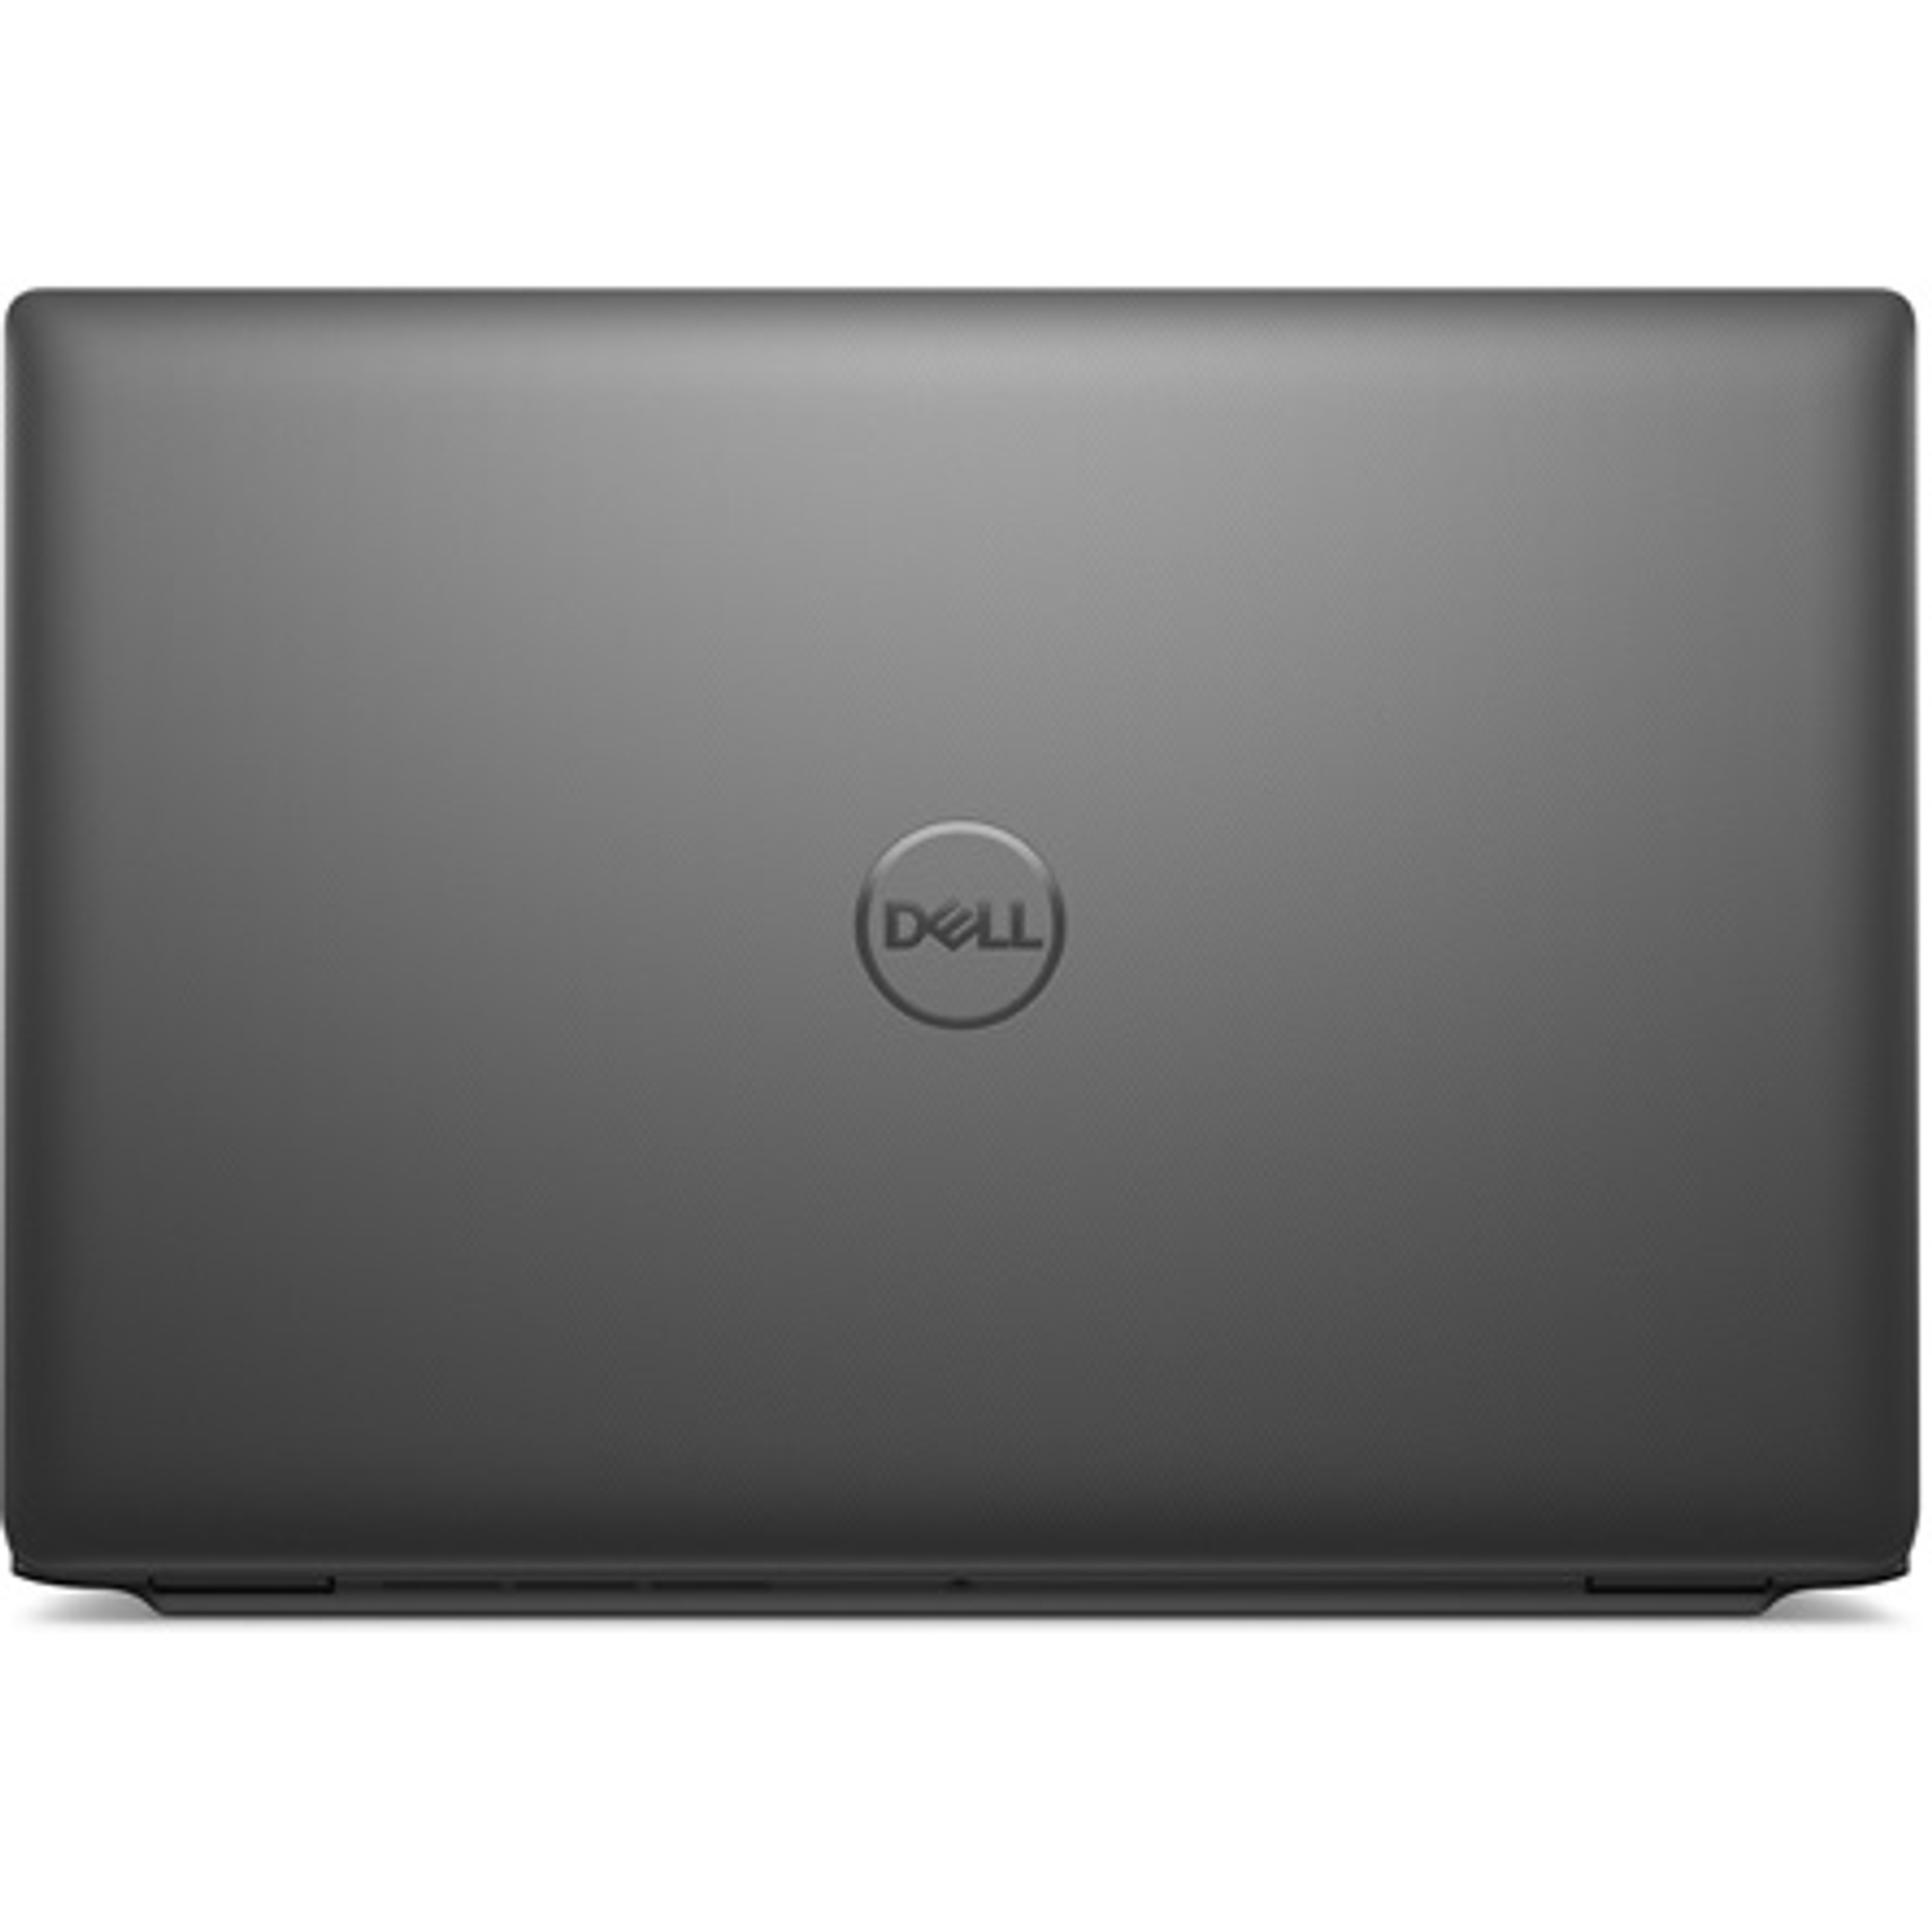 DELL L3440-7 Laptop / Notebook 7